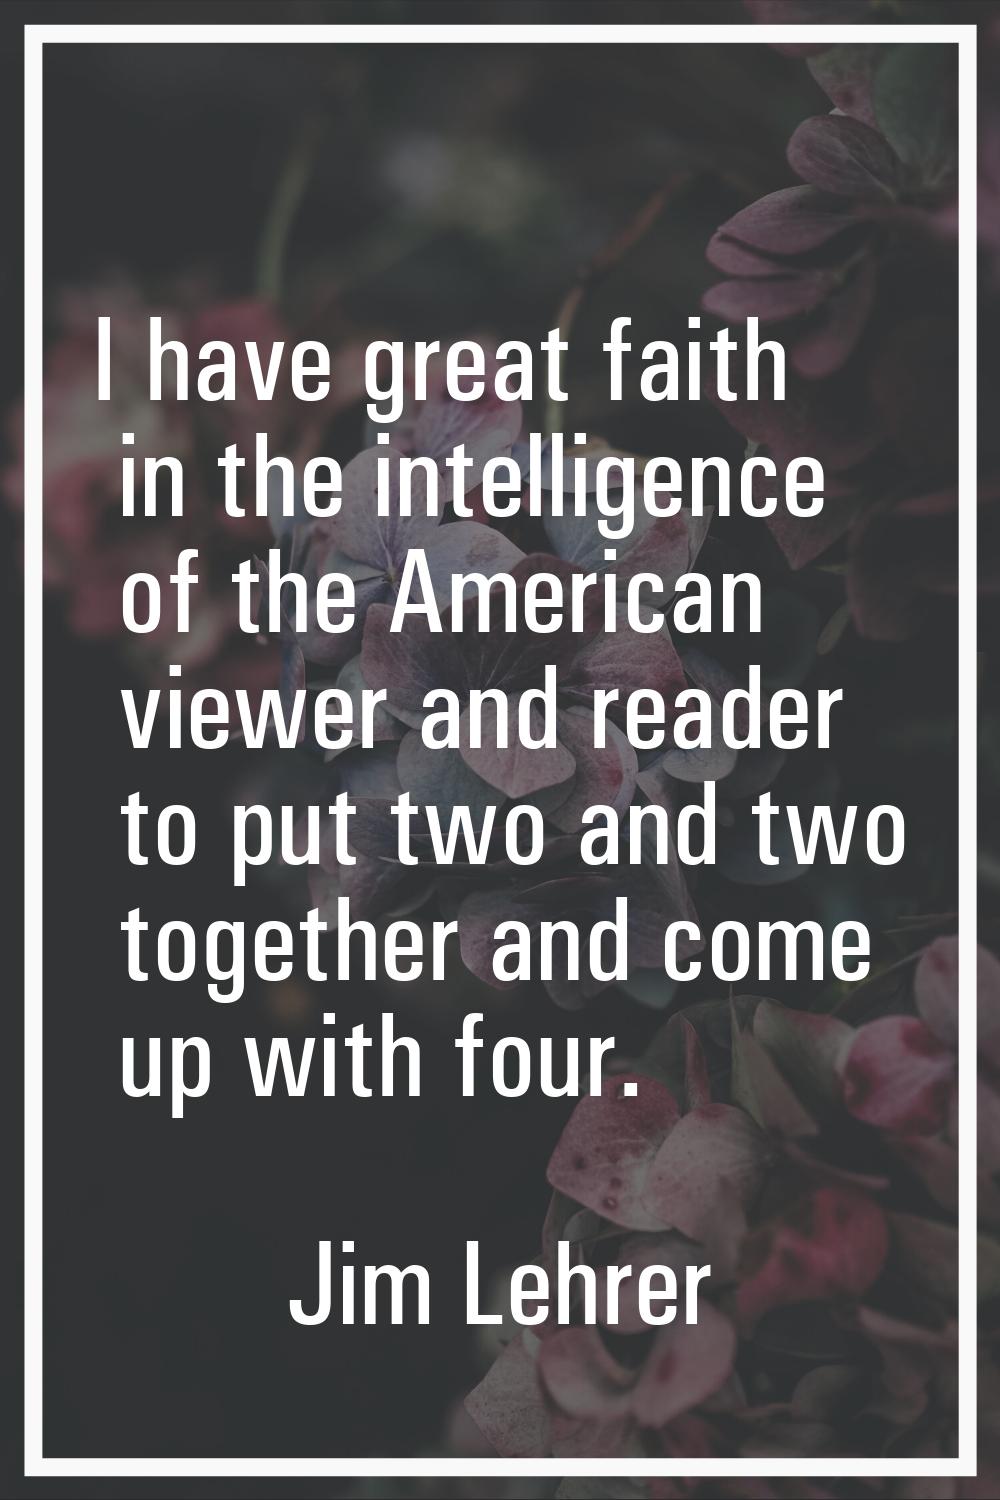 I have great faith in the intelligence of the American viewer and reader to put two and two togethe